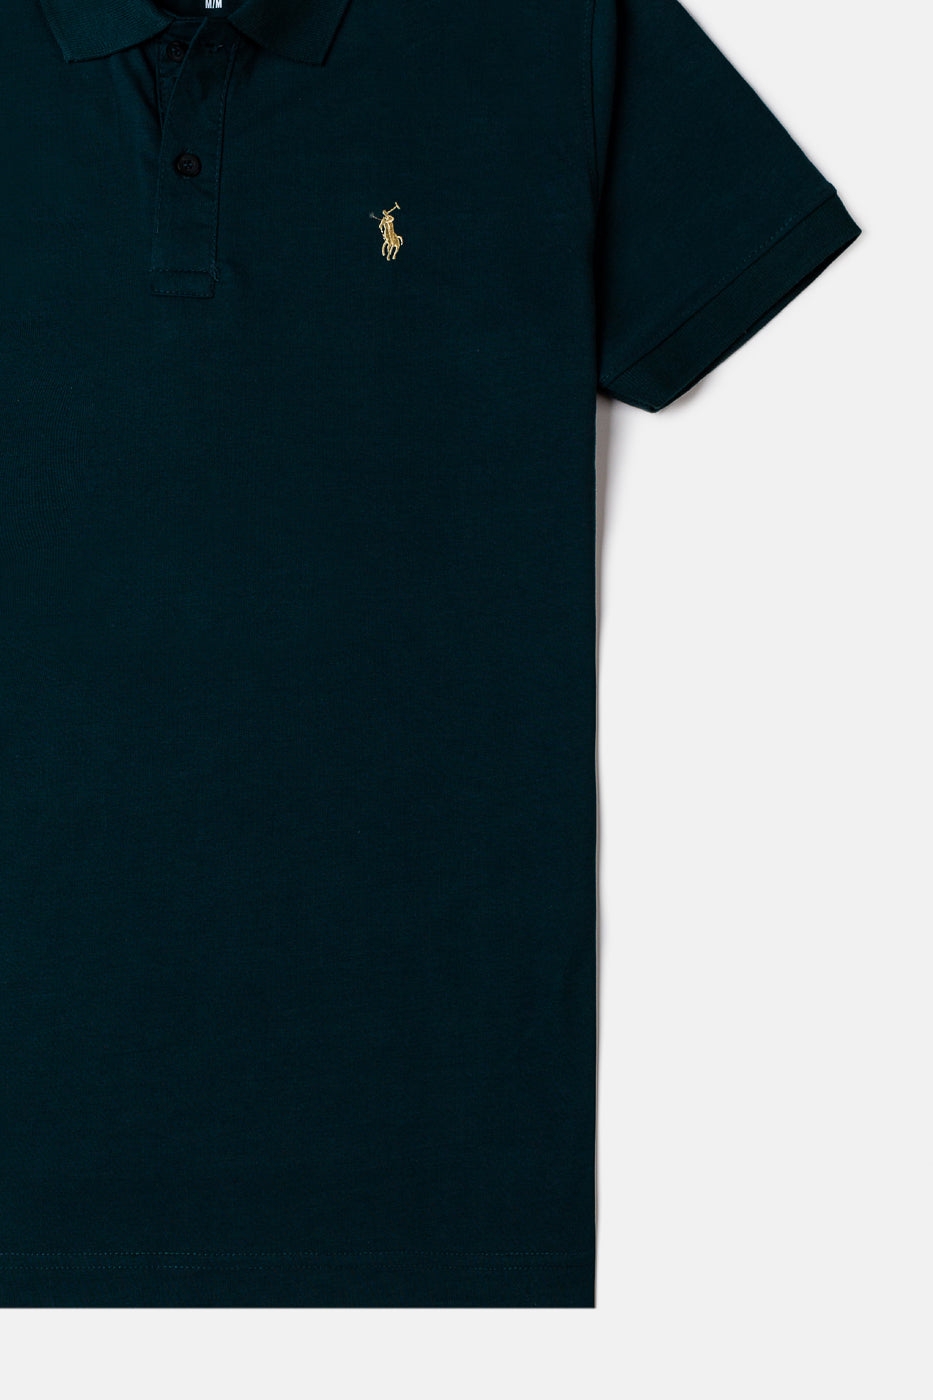 RL Premium Imported Polo Shirt - Forest